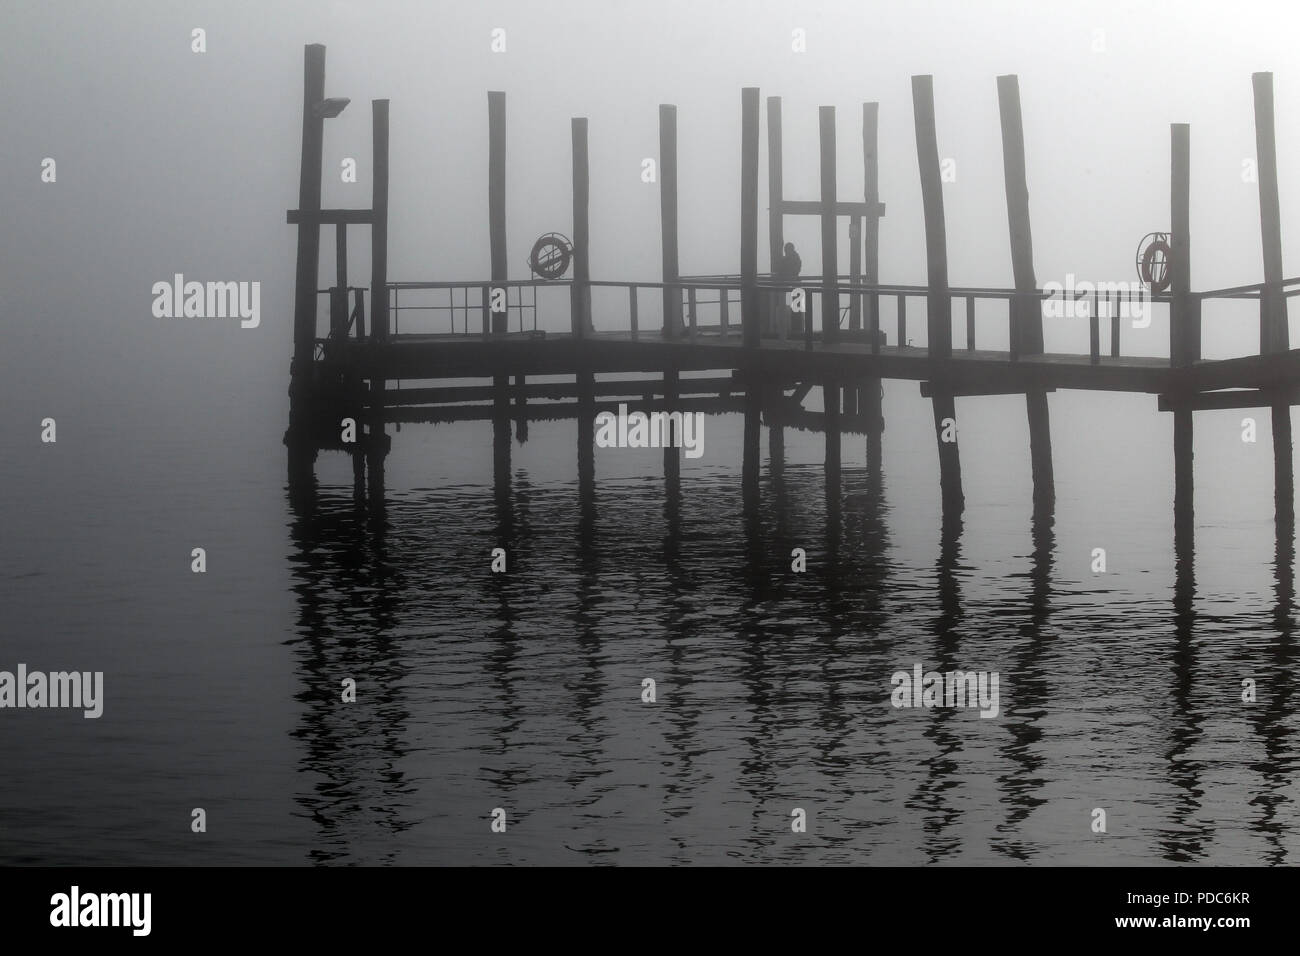 A mist-covered jetty is reflected in the calm waters of Walvis Bay, Namibia, in this monochrome image. Stock Photo